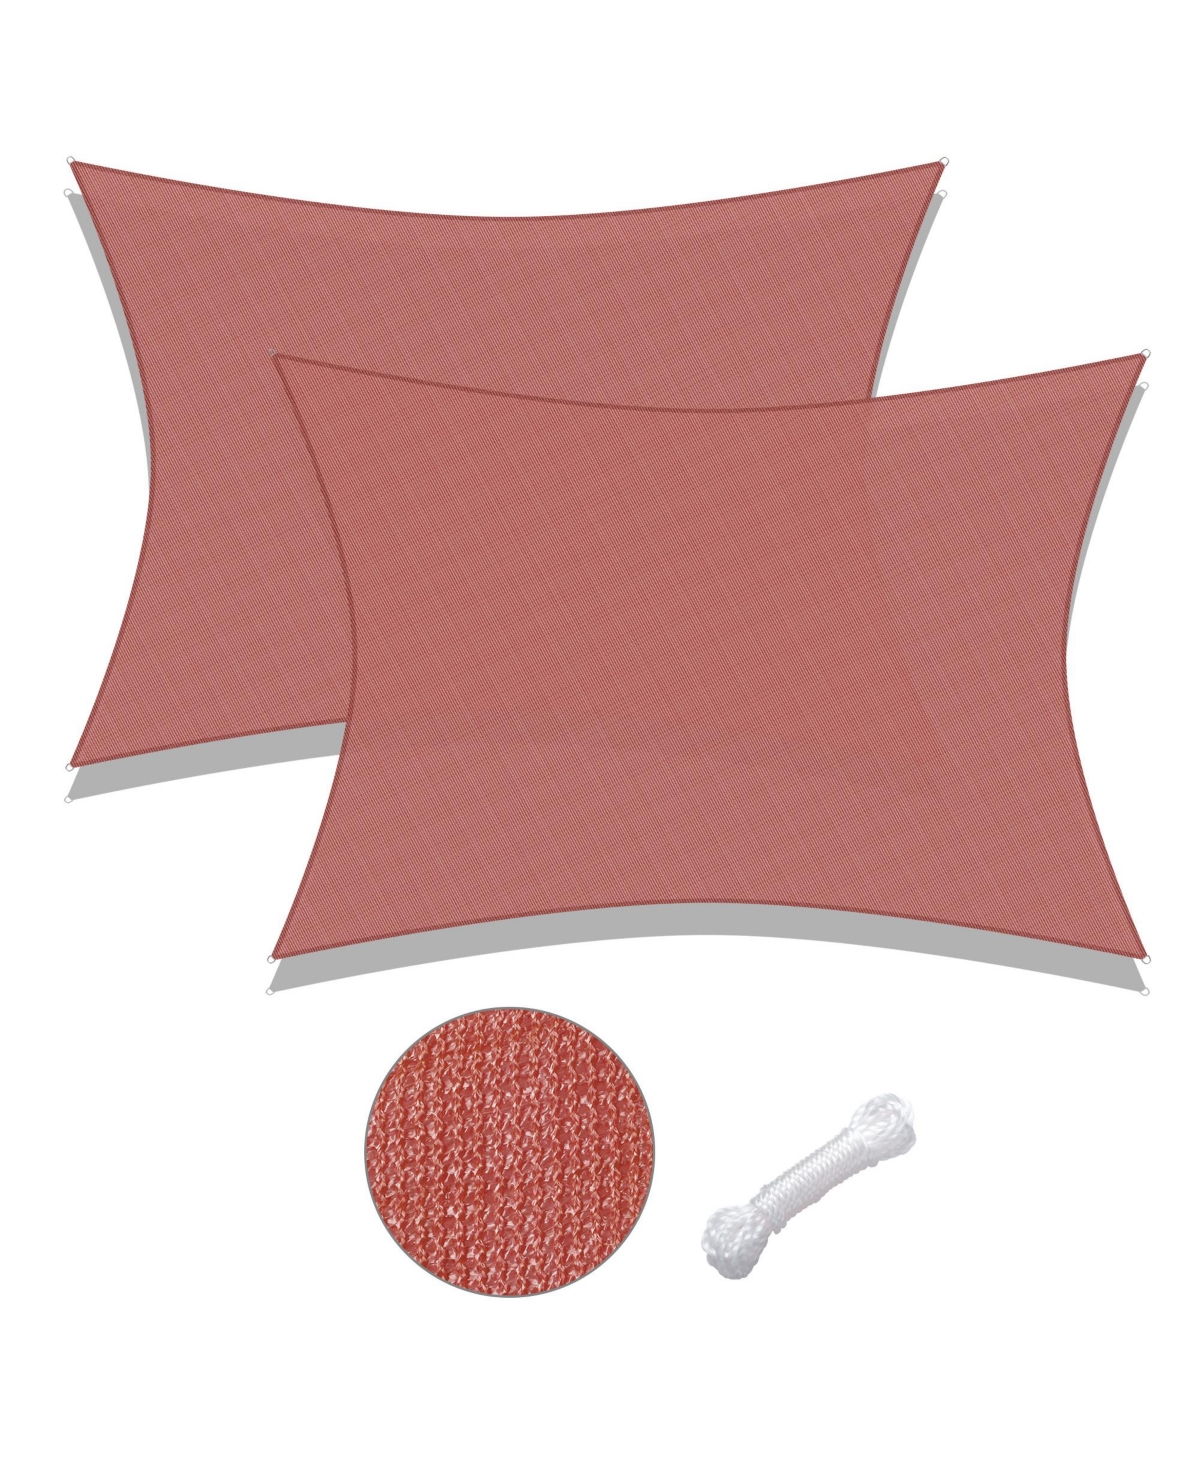 2 Pack 19x13 Ft 97% Uv Block Rectangle Hdpe Sun Shade Sail Canopy Lawn Outdoor - Red